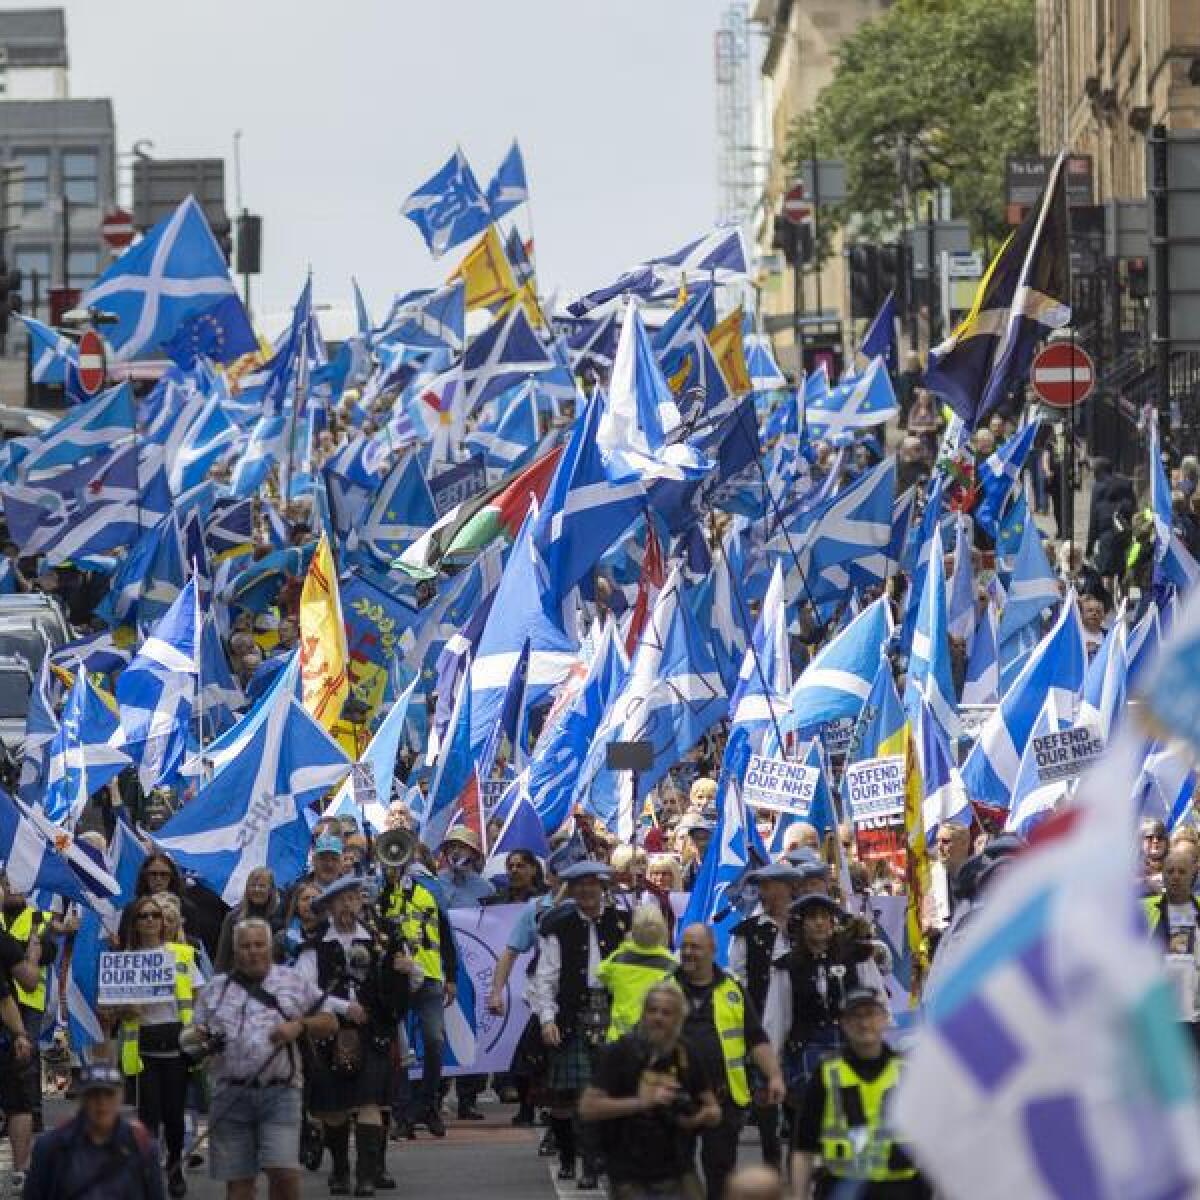 Scottish independence supporters march in Glasgow